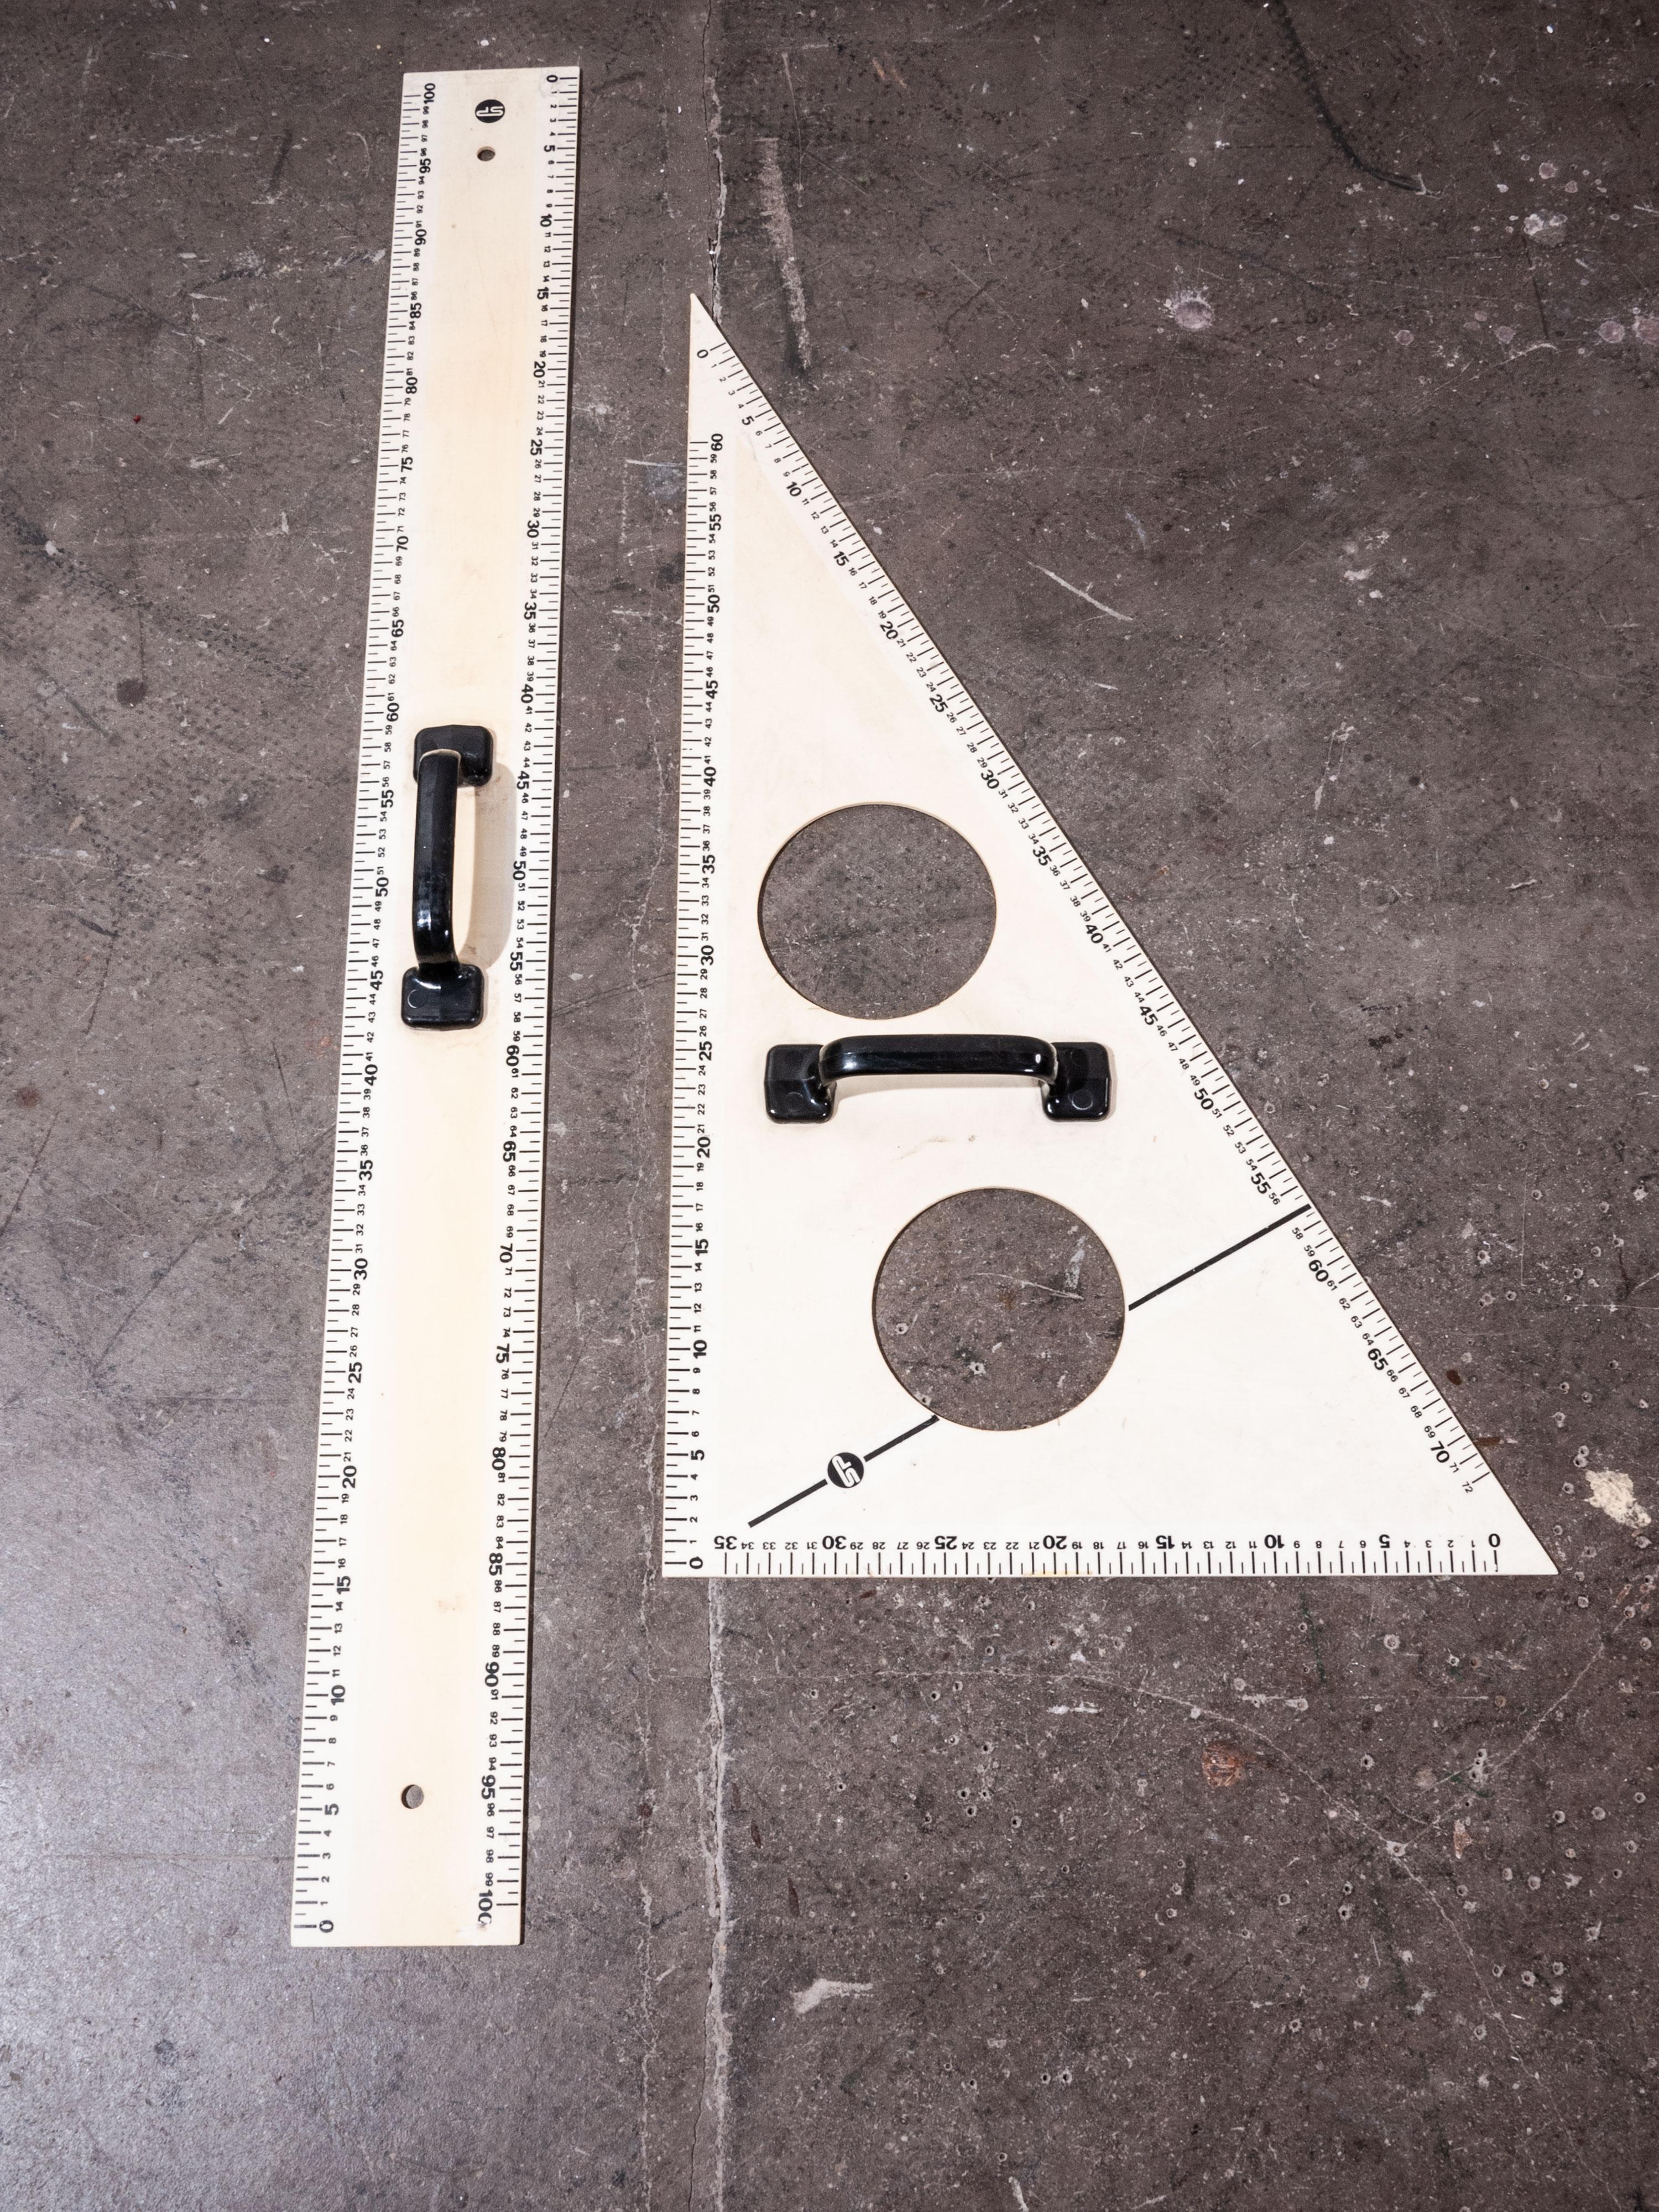 1950s extra large blackboard measures set, two pieces
1950s extra large blackboard measures set. Made from a dense opaque acrylic with chunky black handles. Ruler is 103 cm in total length.

Workshop report
Our workshop team inspect every